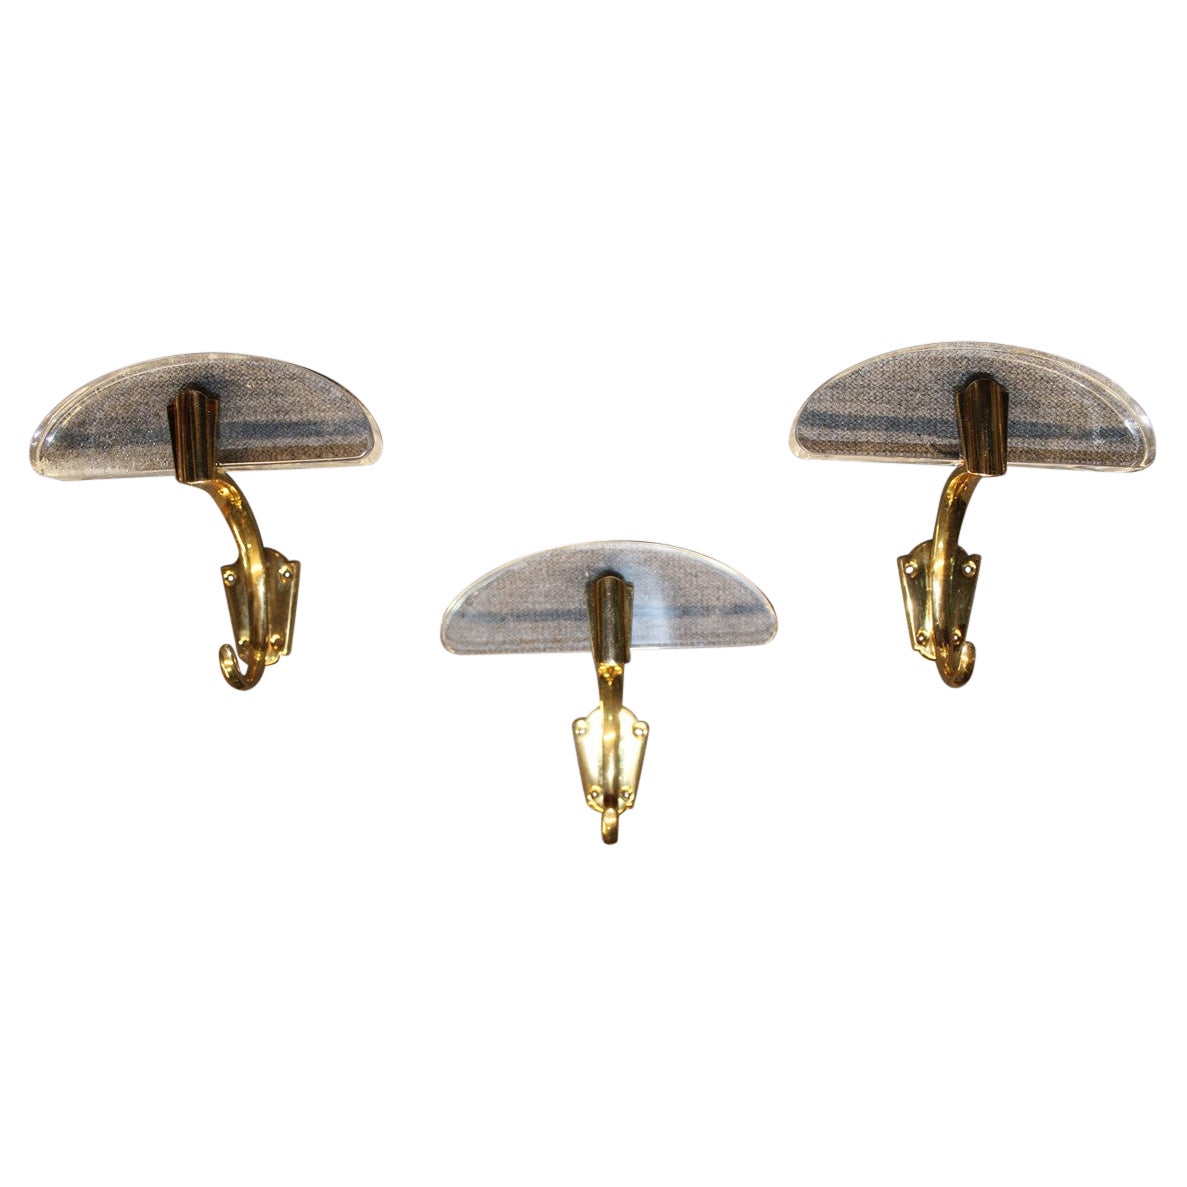 Coat Hangers in Lucite and Solid Brass Italian 1950s Mid Century Design For Sale